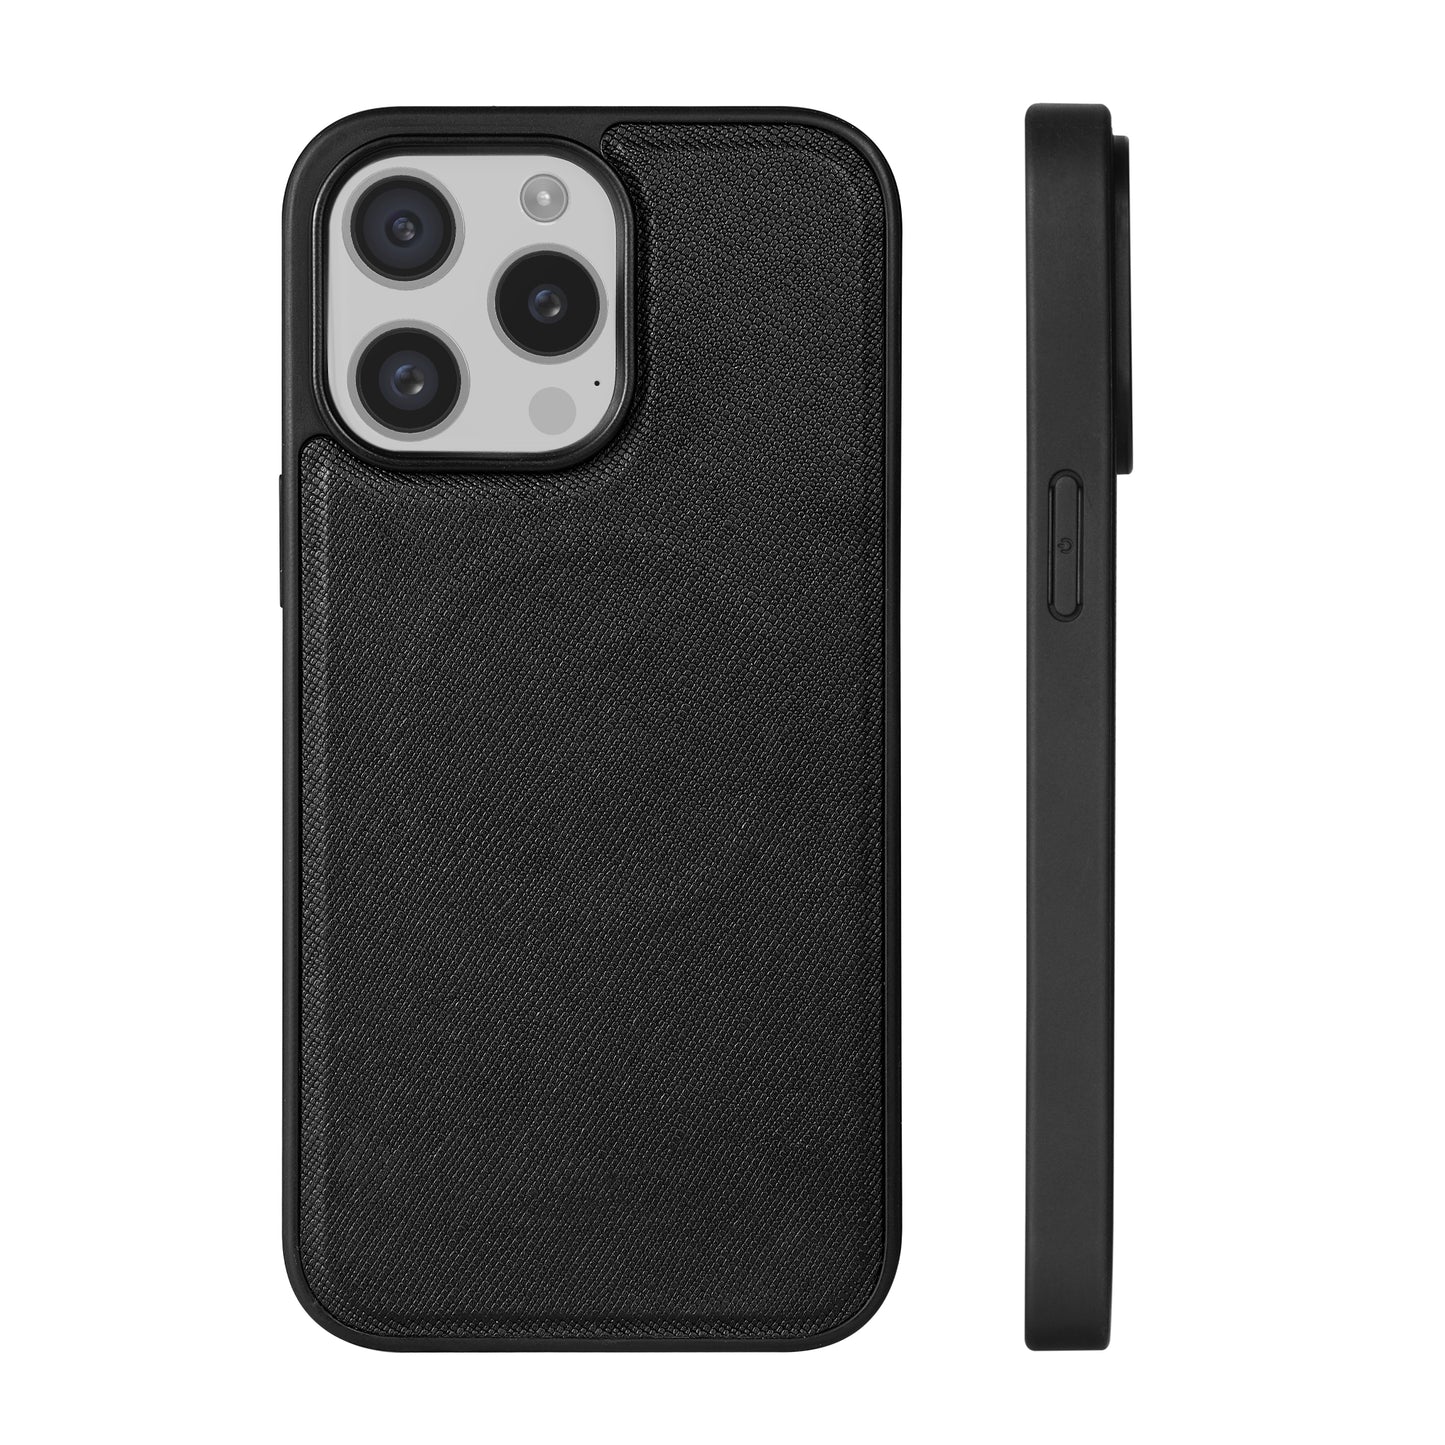 HELIX Heli-Lux Leather MagSafe Case with Protective Corners for iPhone 15 Pro Max - Black